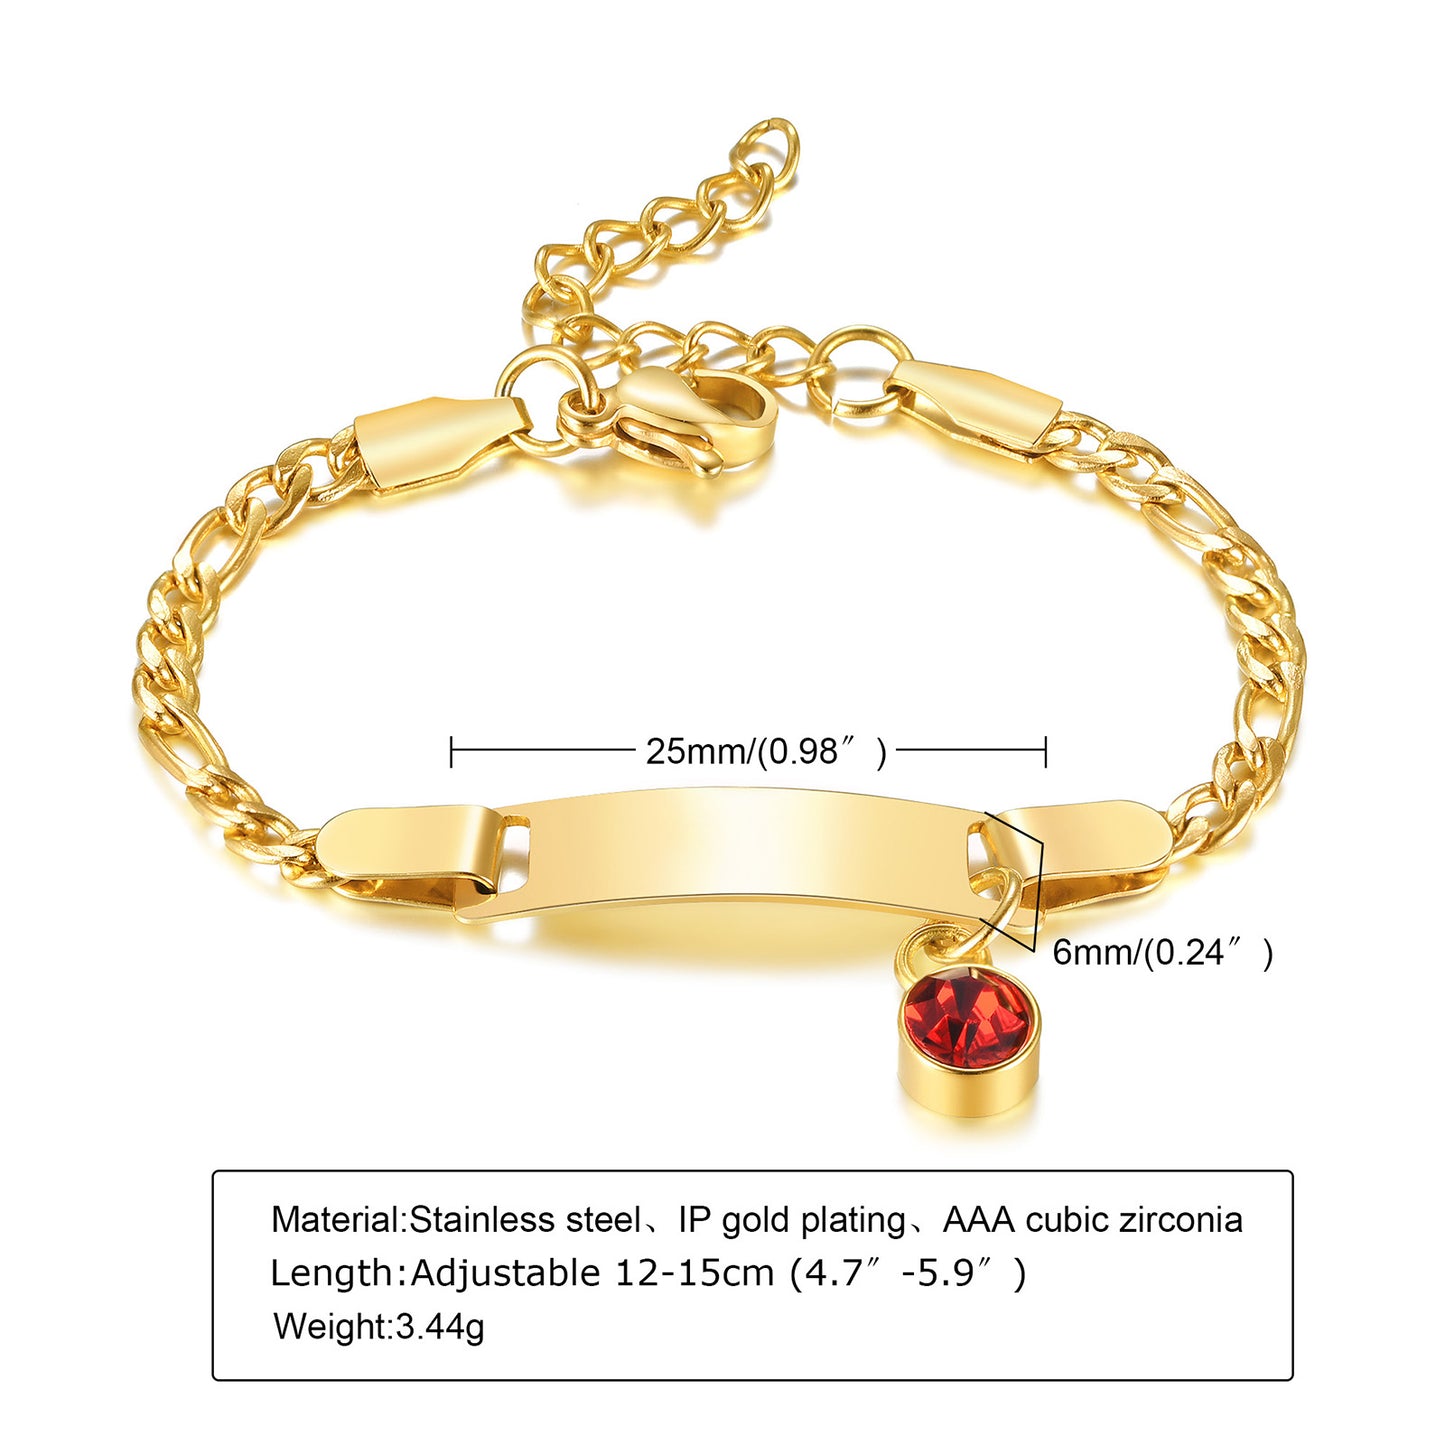 Baby and Children's Bracelets:  Steel with Gold IP Engravable Bracelets with Pink CZ Charm - Age 3 Months to 5 Years